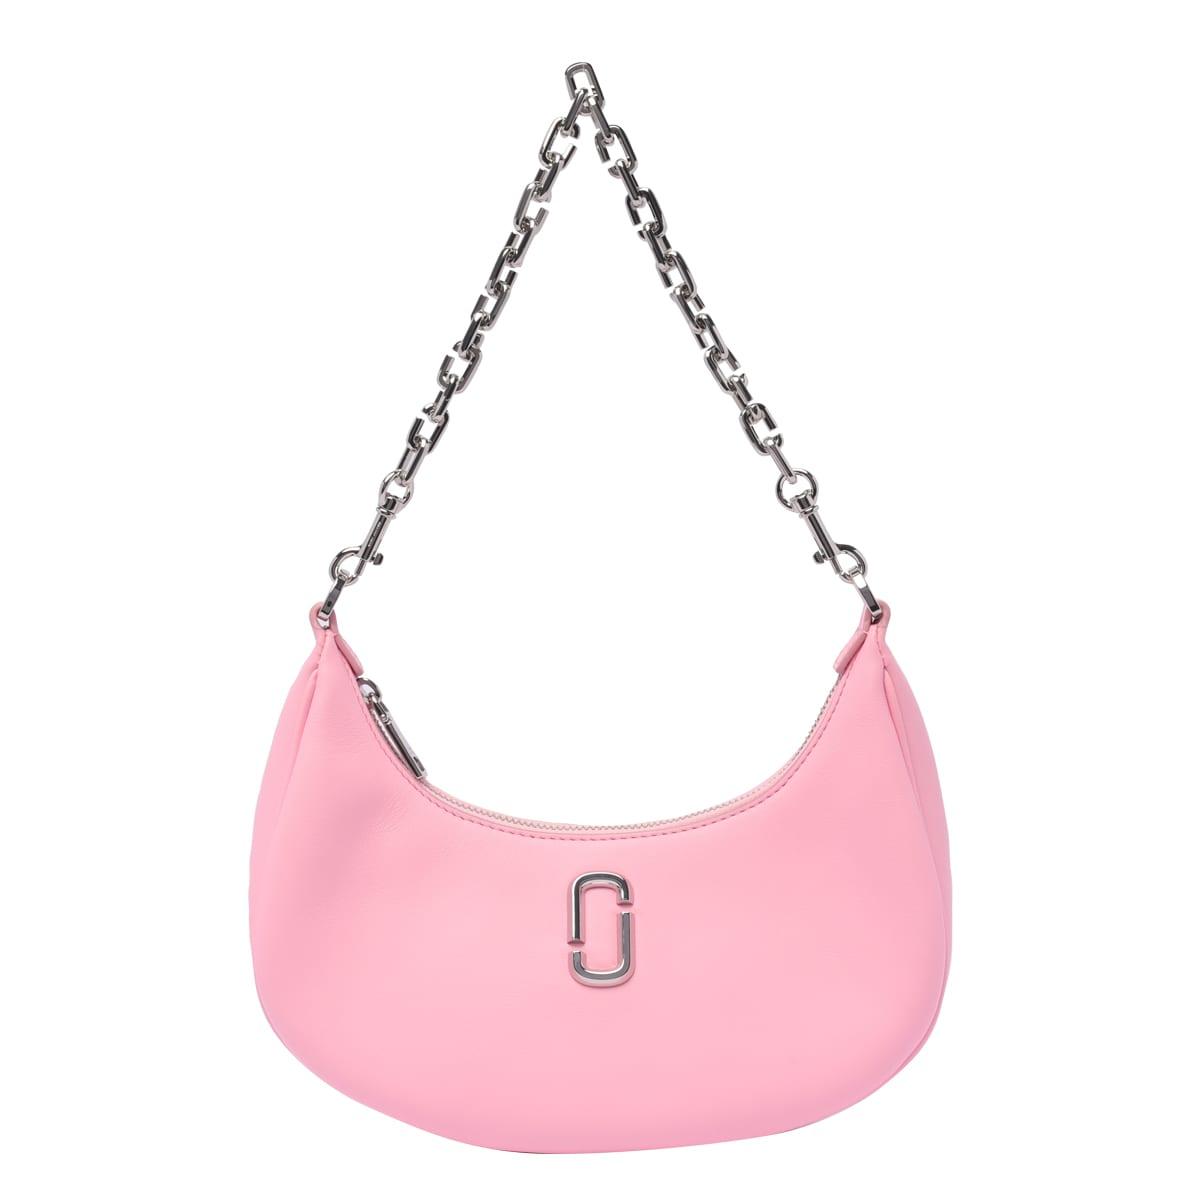 Marc Jacobs The Small Curve Shoulder Bag in Pink | Lyst